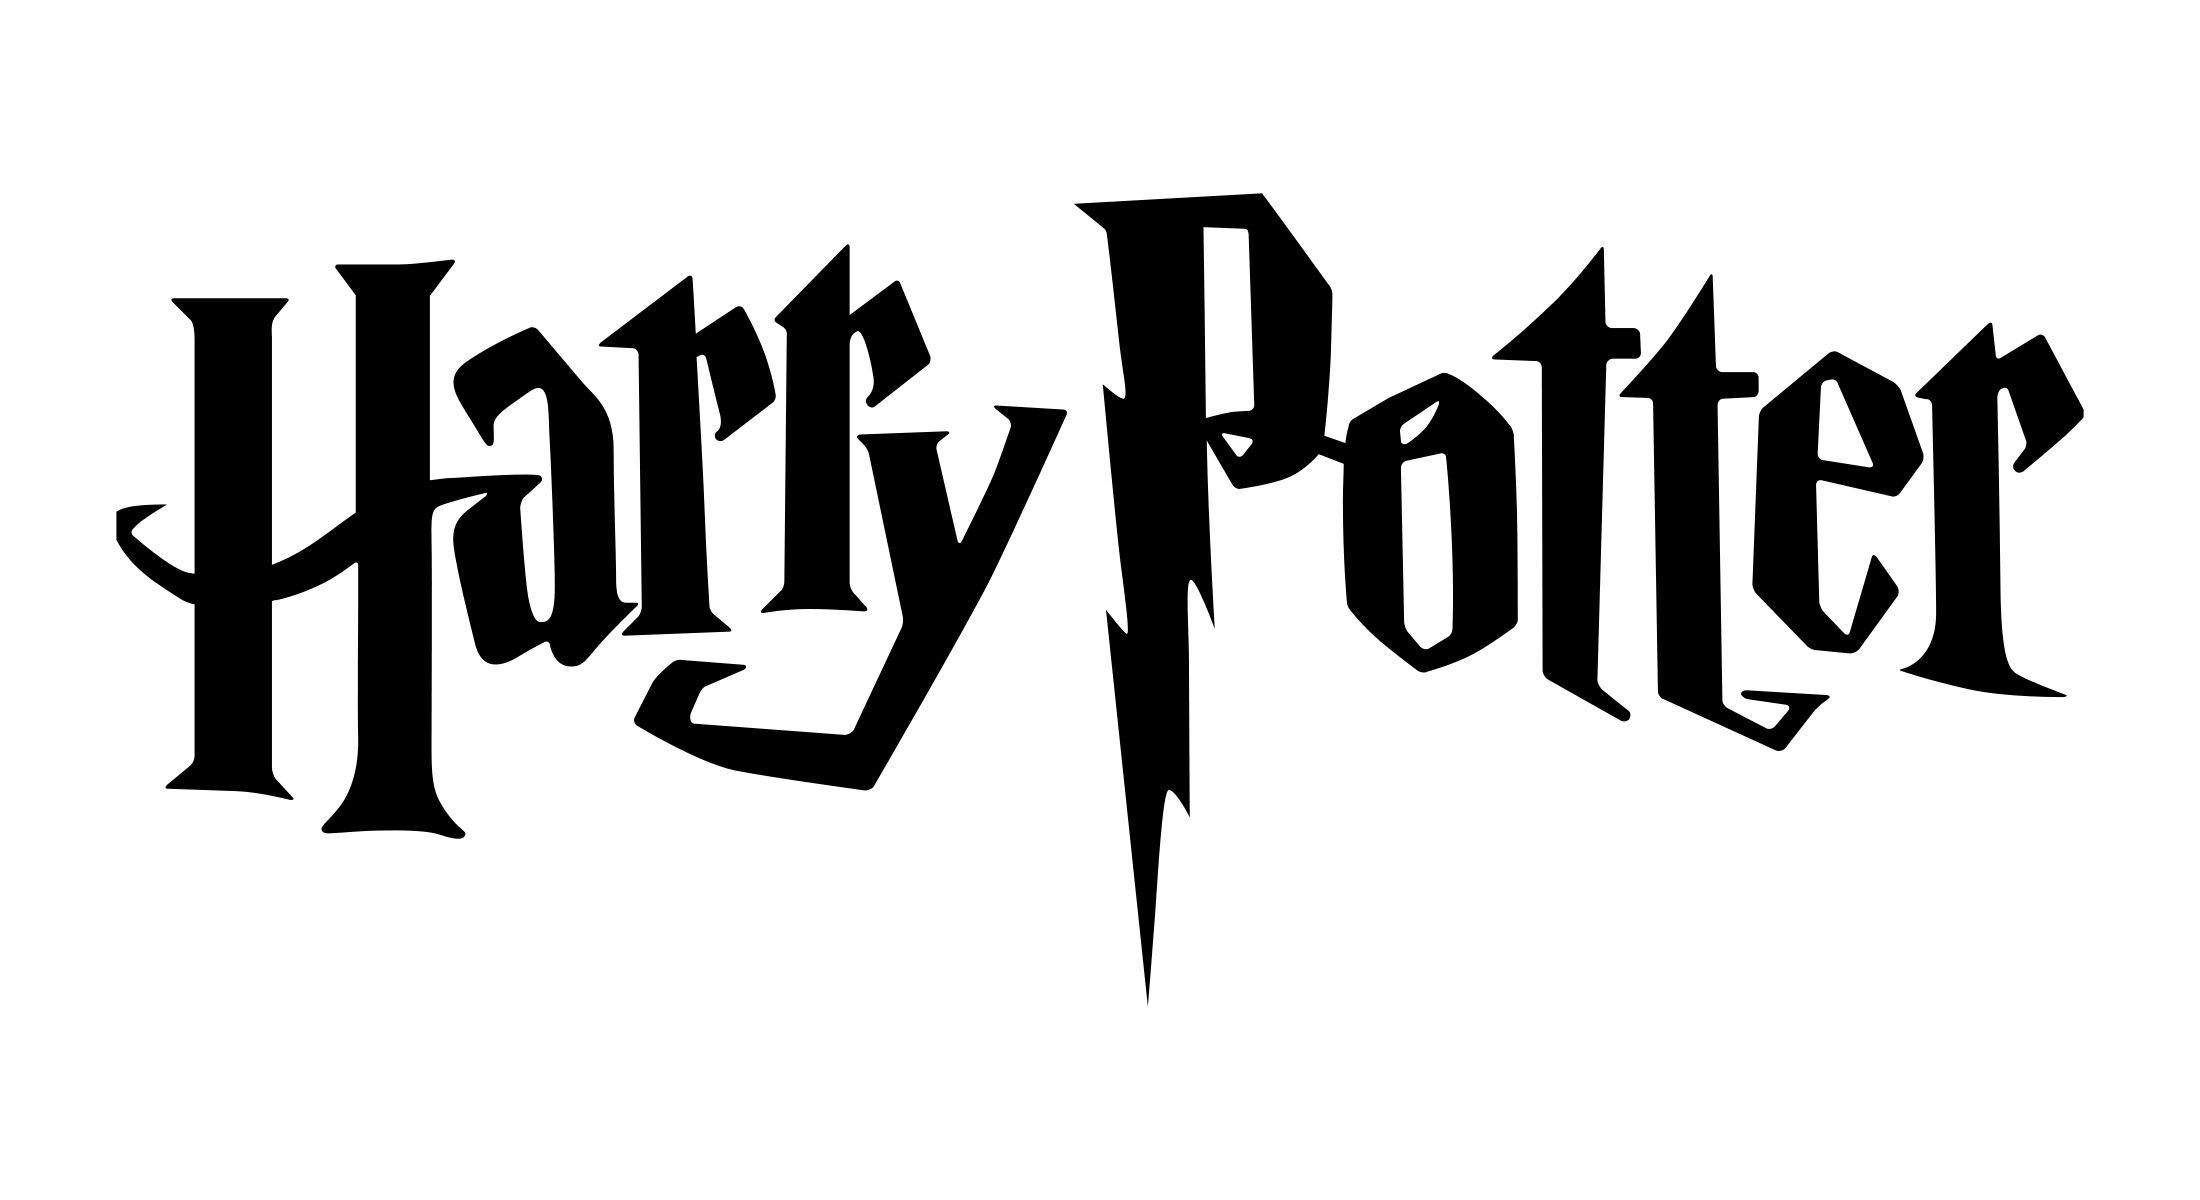 New Harry Potter Logo - Harry Potter Logo, Harry Potter Symbol Meaning, History and Evolution